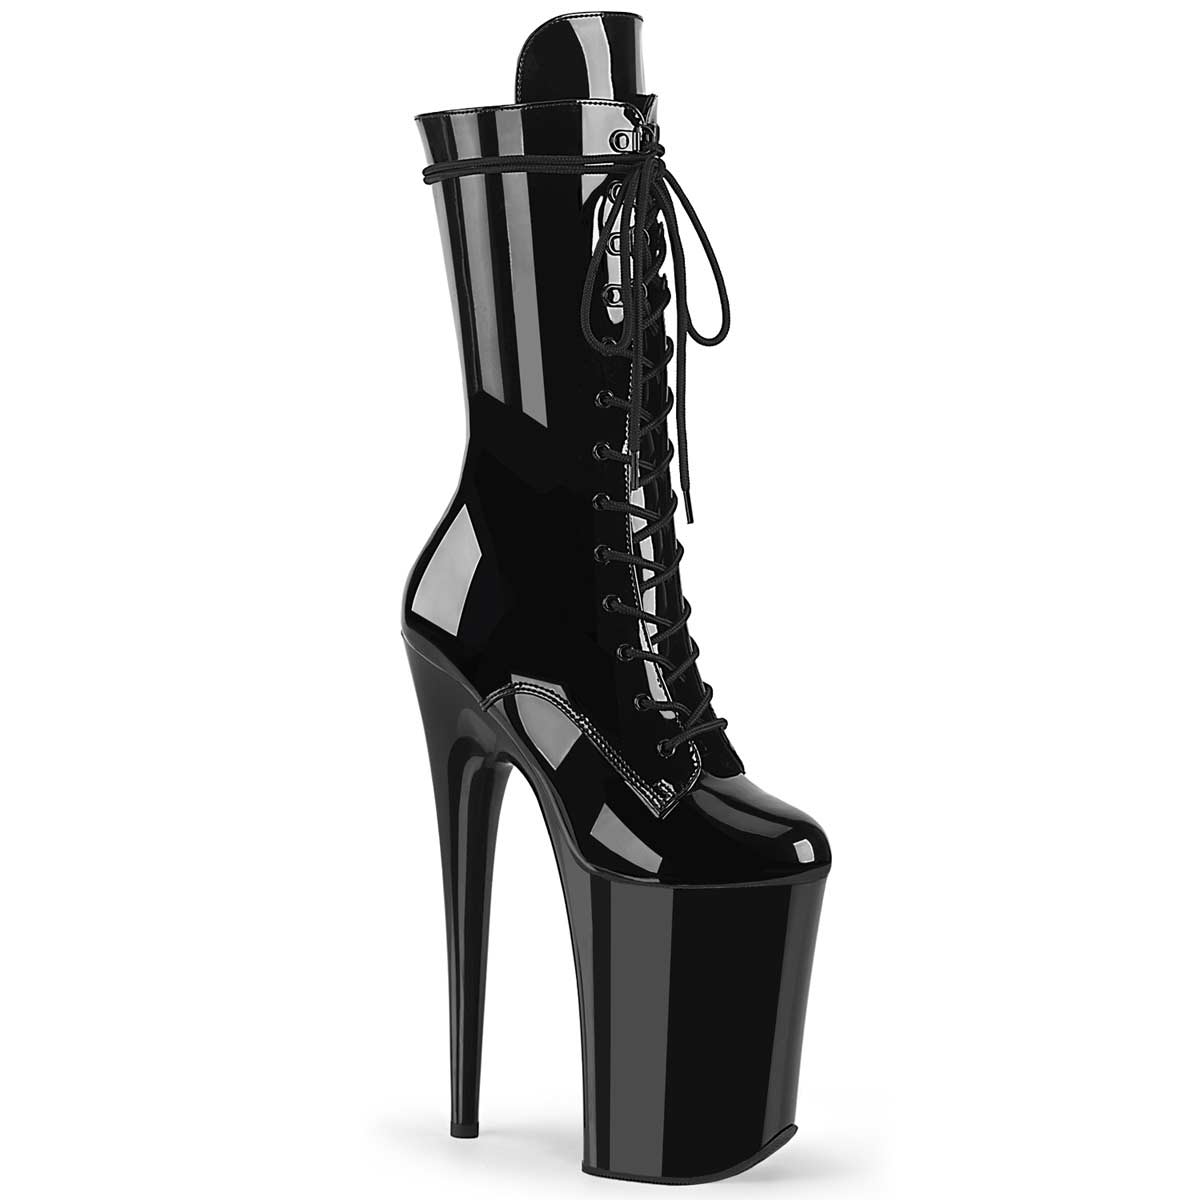 Pleaser Infinity-1050 - Black Patent in Sexy Boots - $105.55